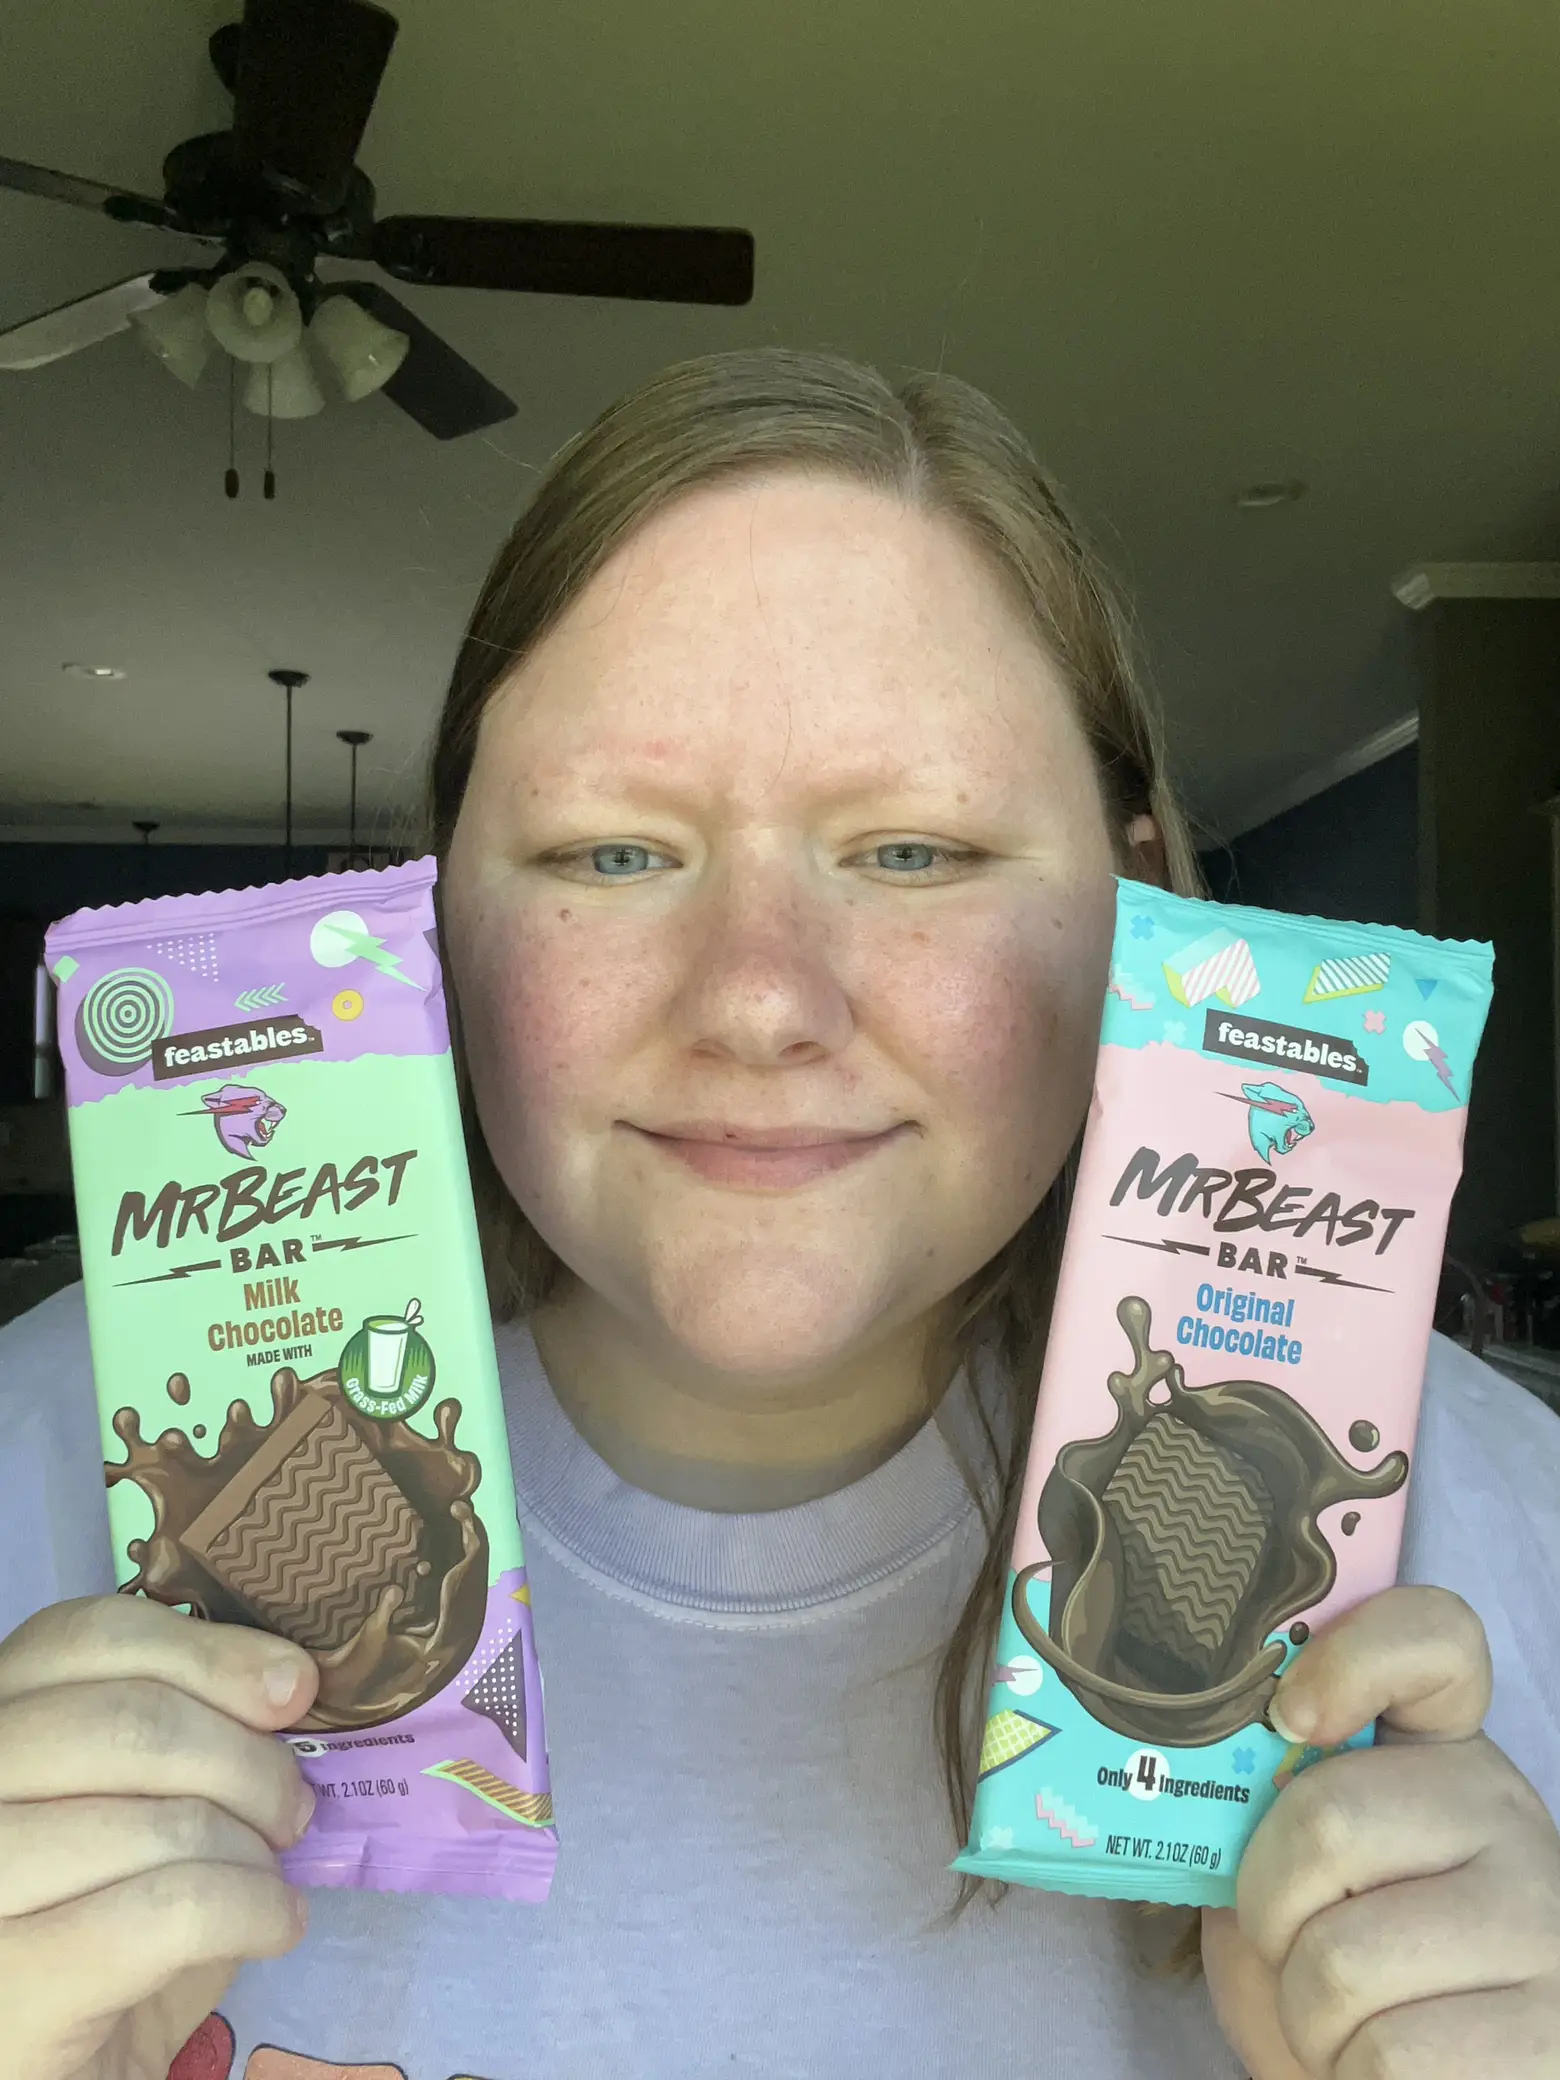 MrBeast's New Dairy-Free Chocolate Bars Come with a $1 Million